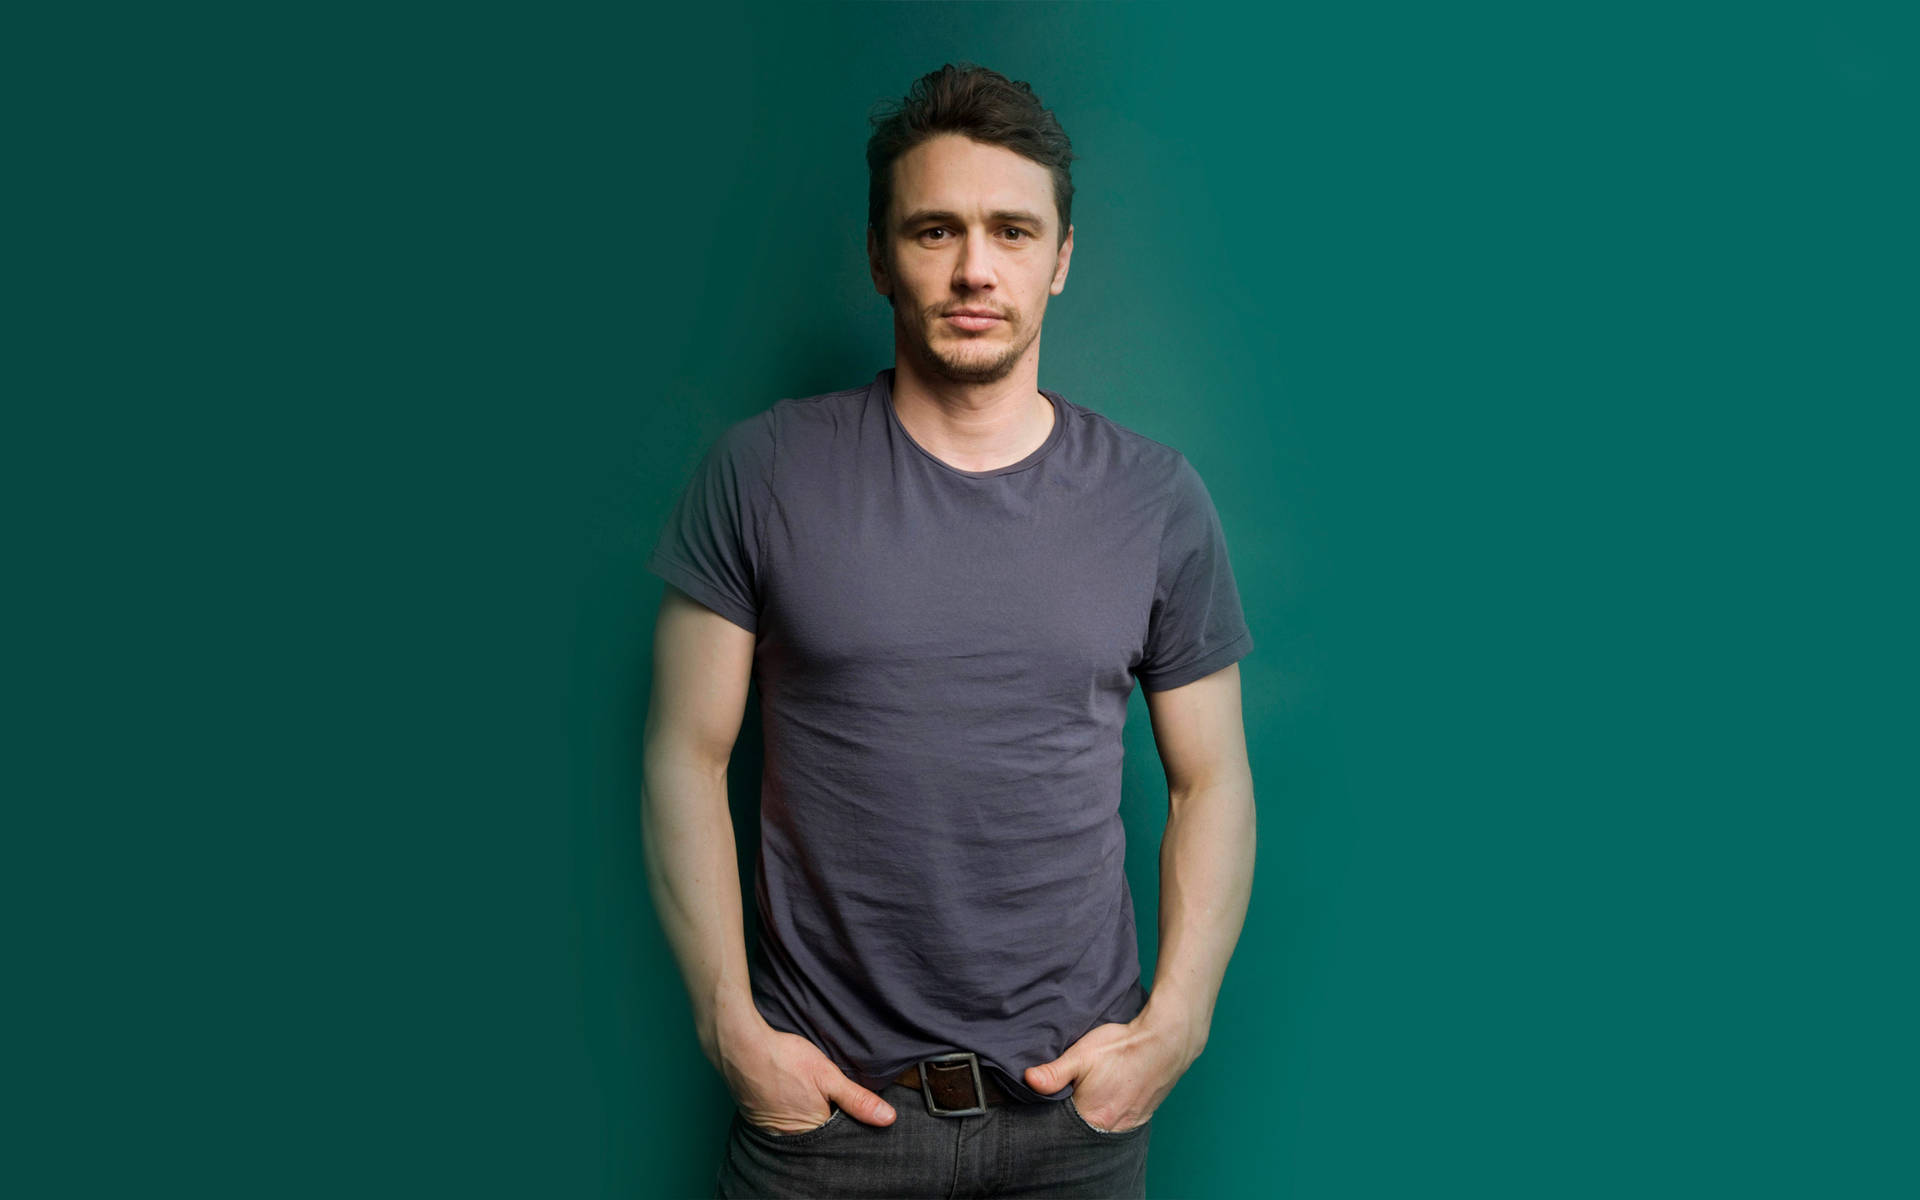 James Franco In Grey Shirt Against A Vibrant Green Background